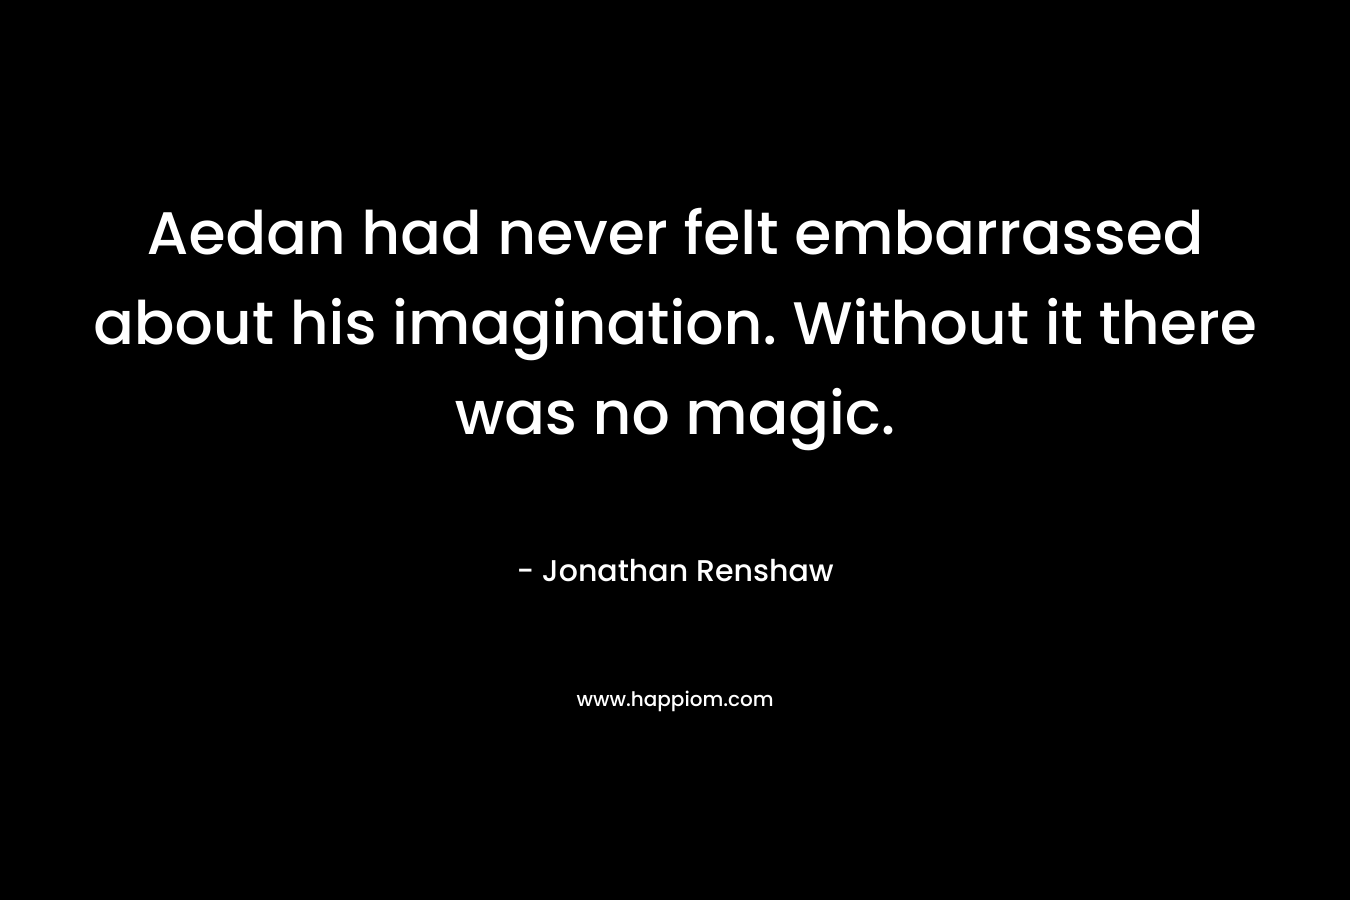 Aedan had never felt embarrassed about his imagination. Without it there was no magic. – Jonathan Renshaw